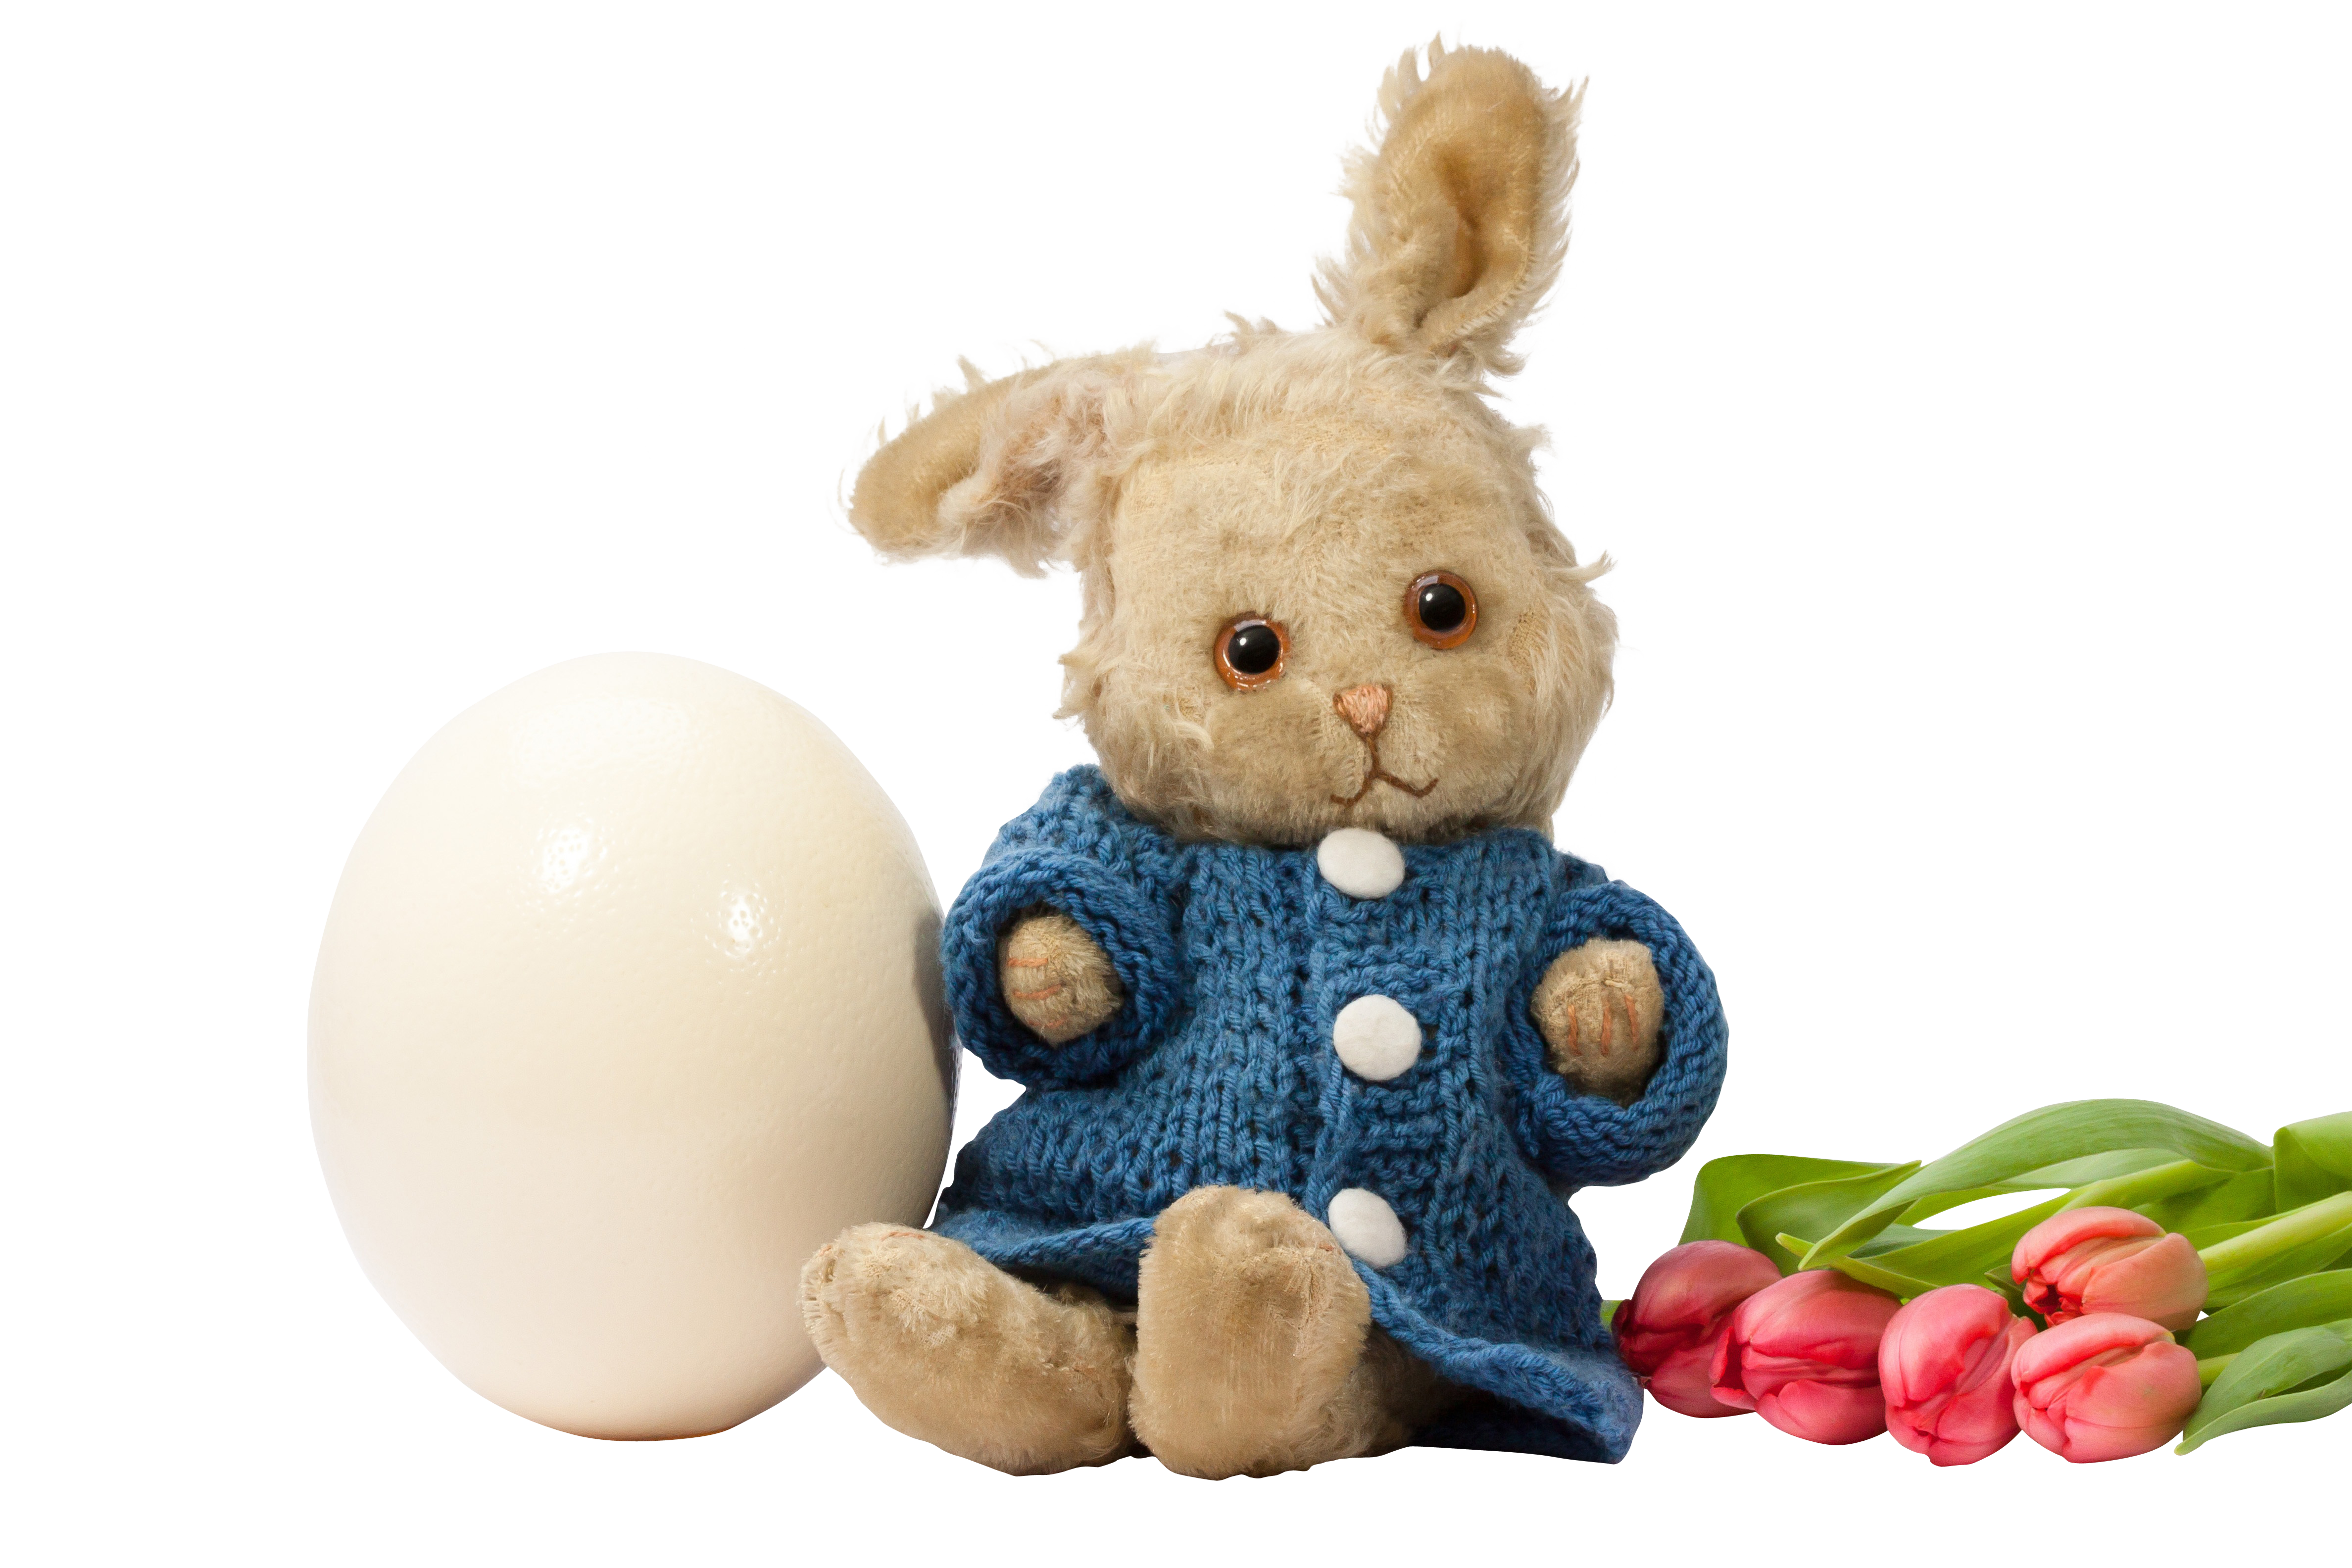 Easter Bunny Plush Toy With Egg And Tulips